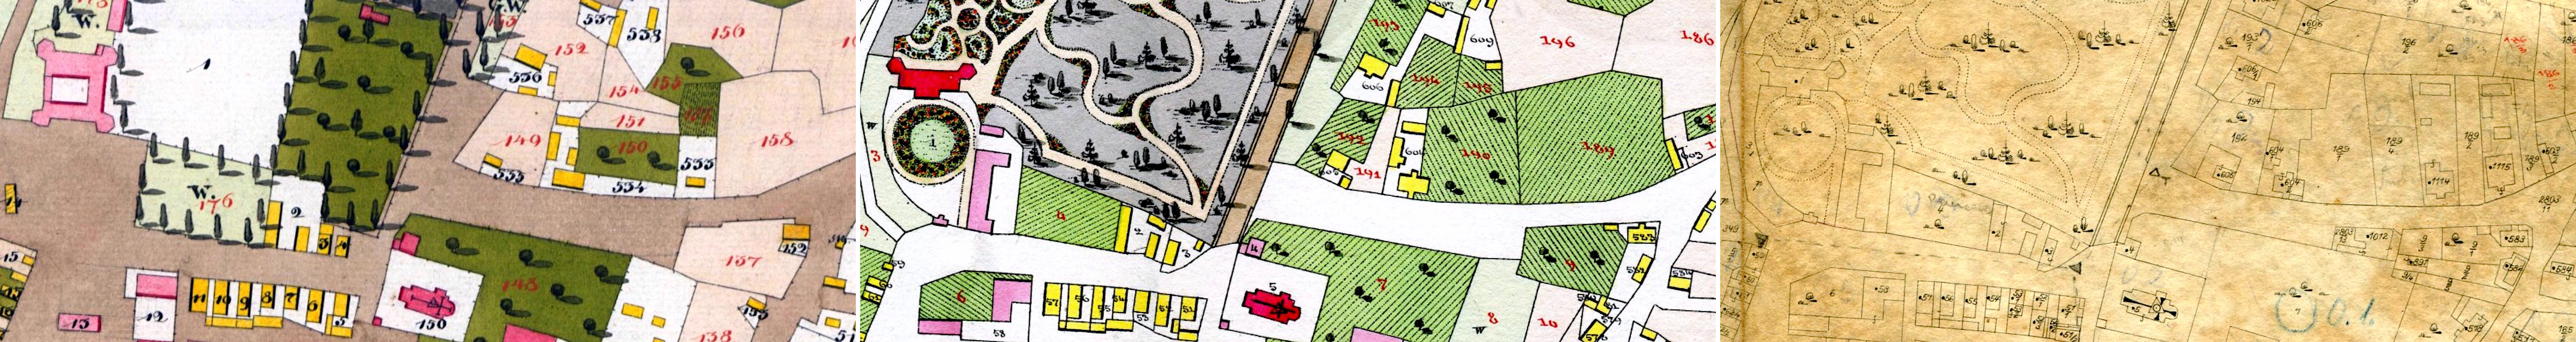 three examples illustrating cadastral map style and color changes over the years